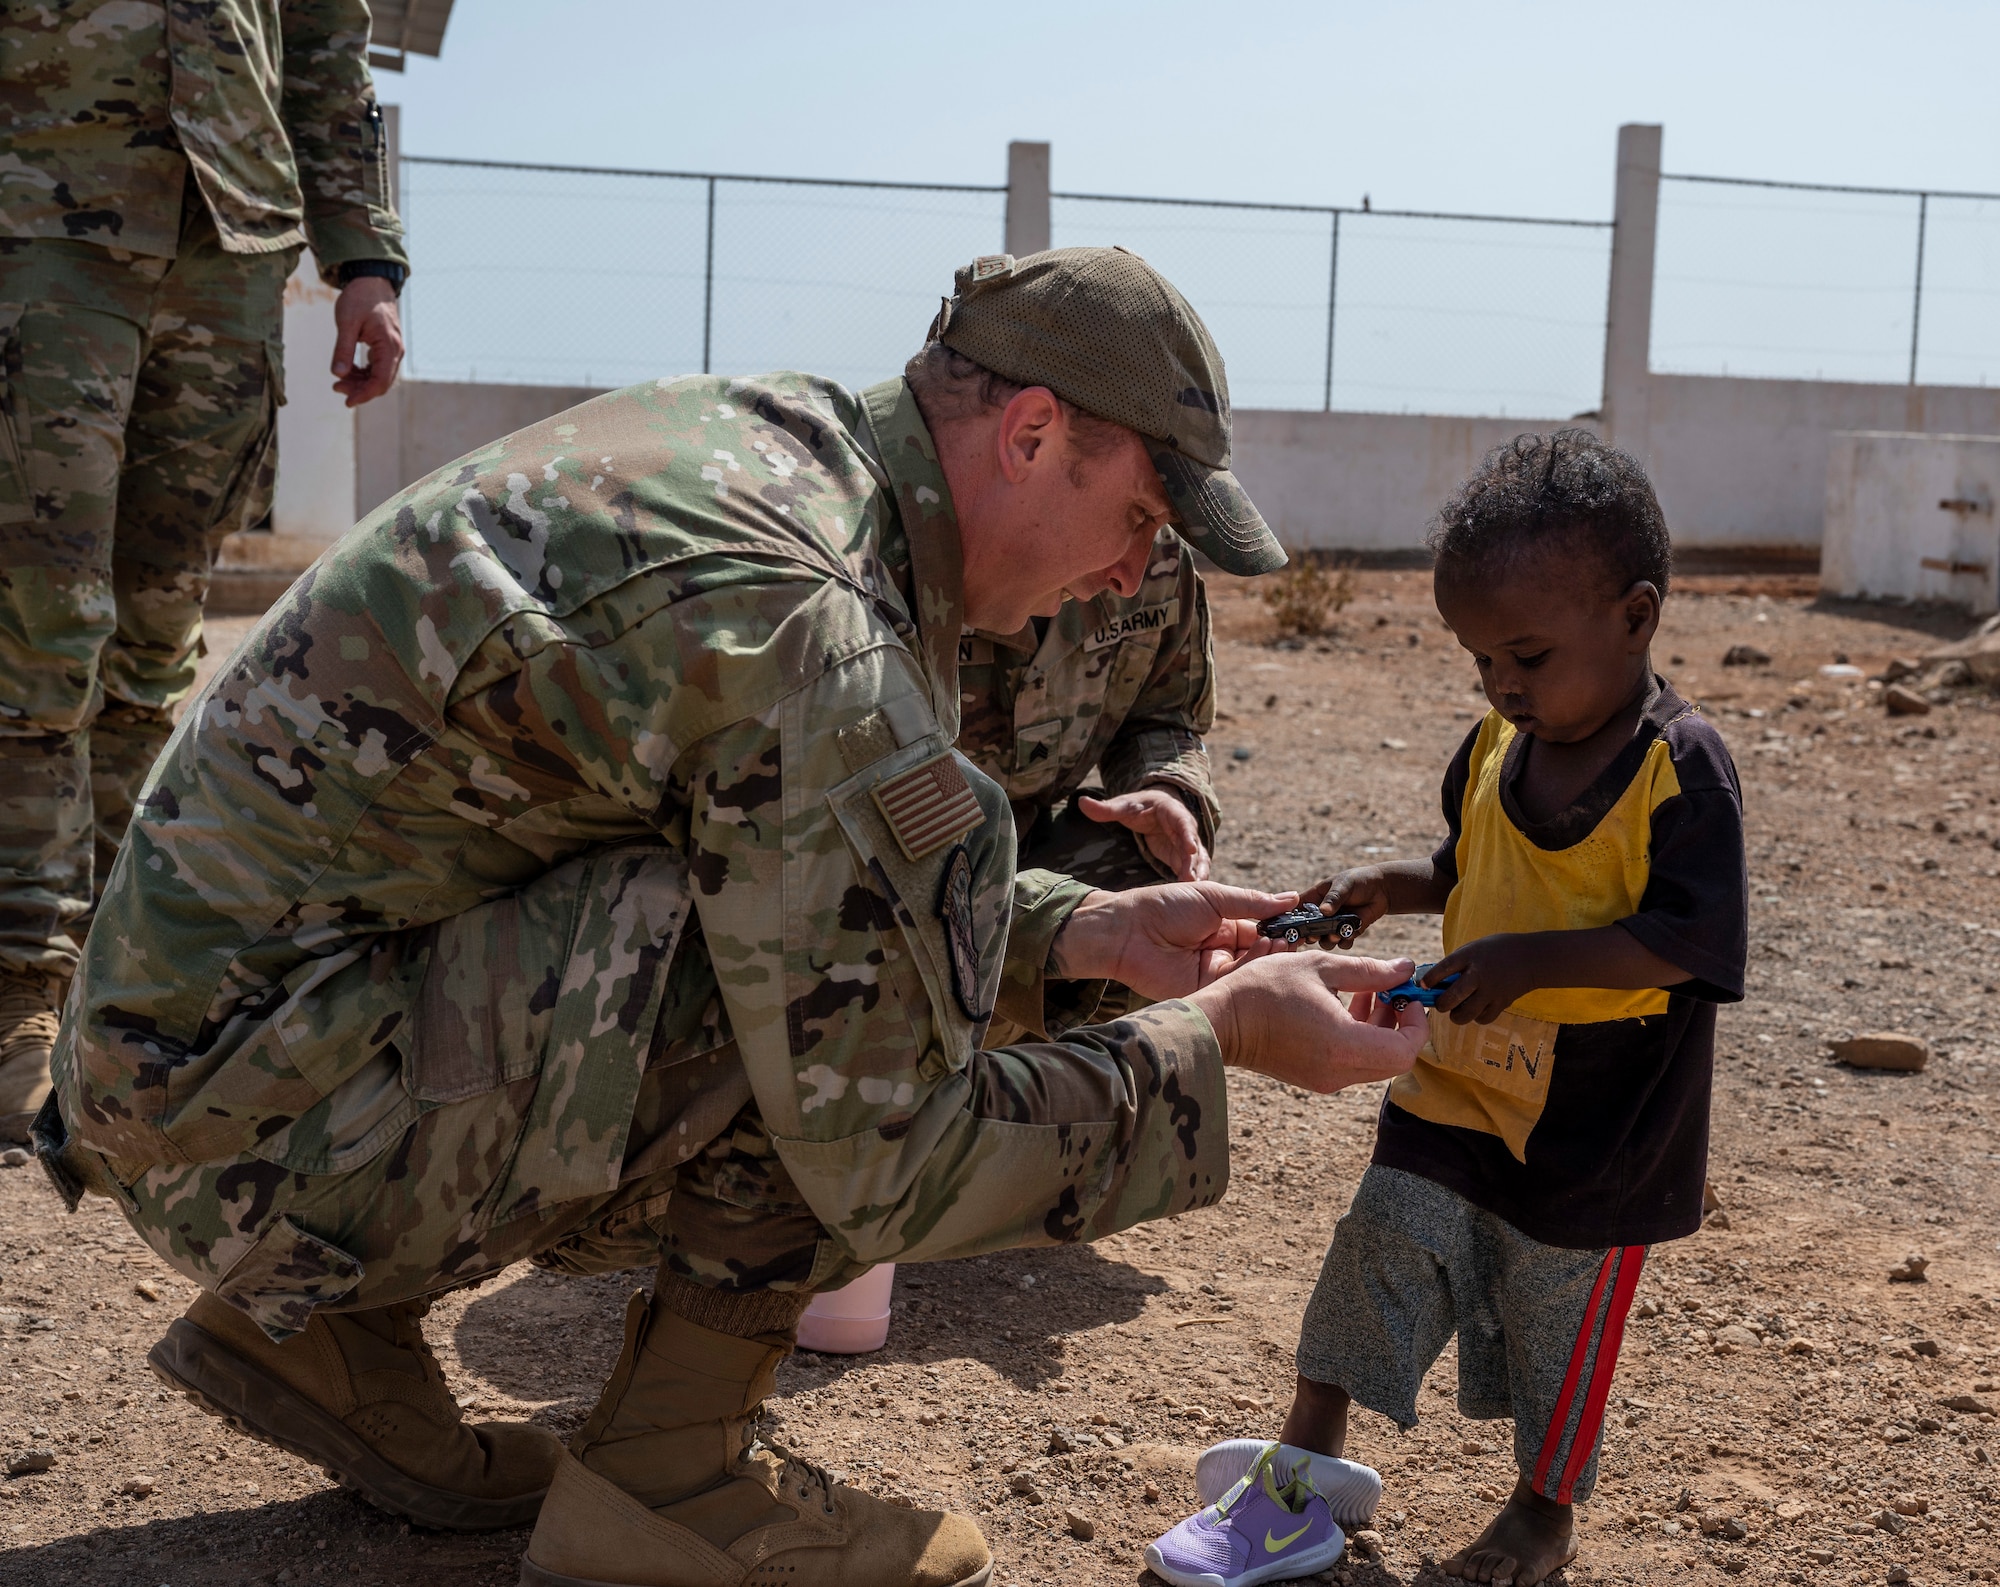 U.S. Airmen and Soldiers visit Chabelley Village, Djibouti